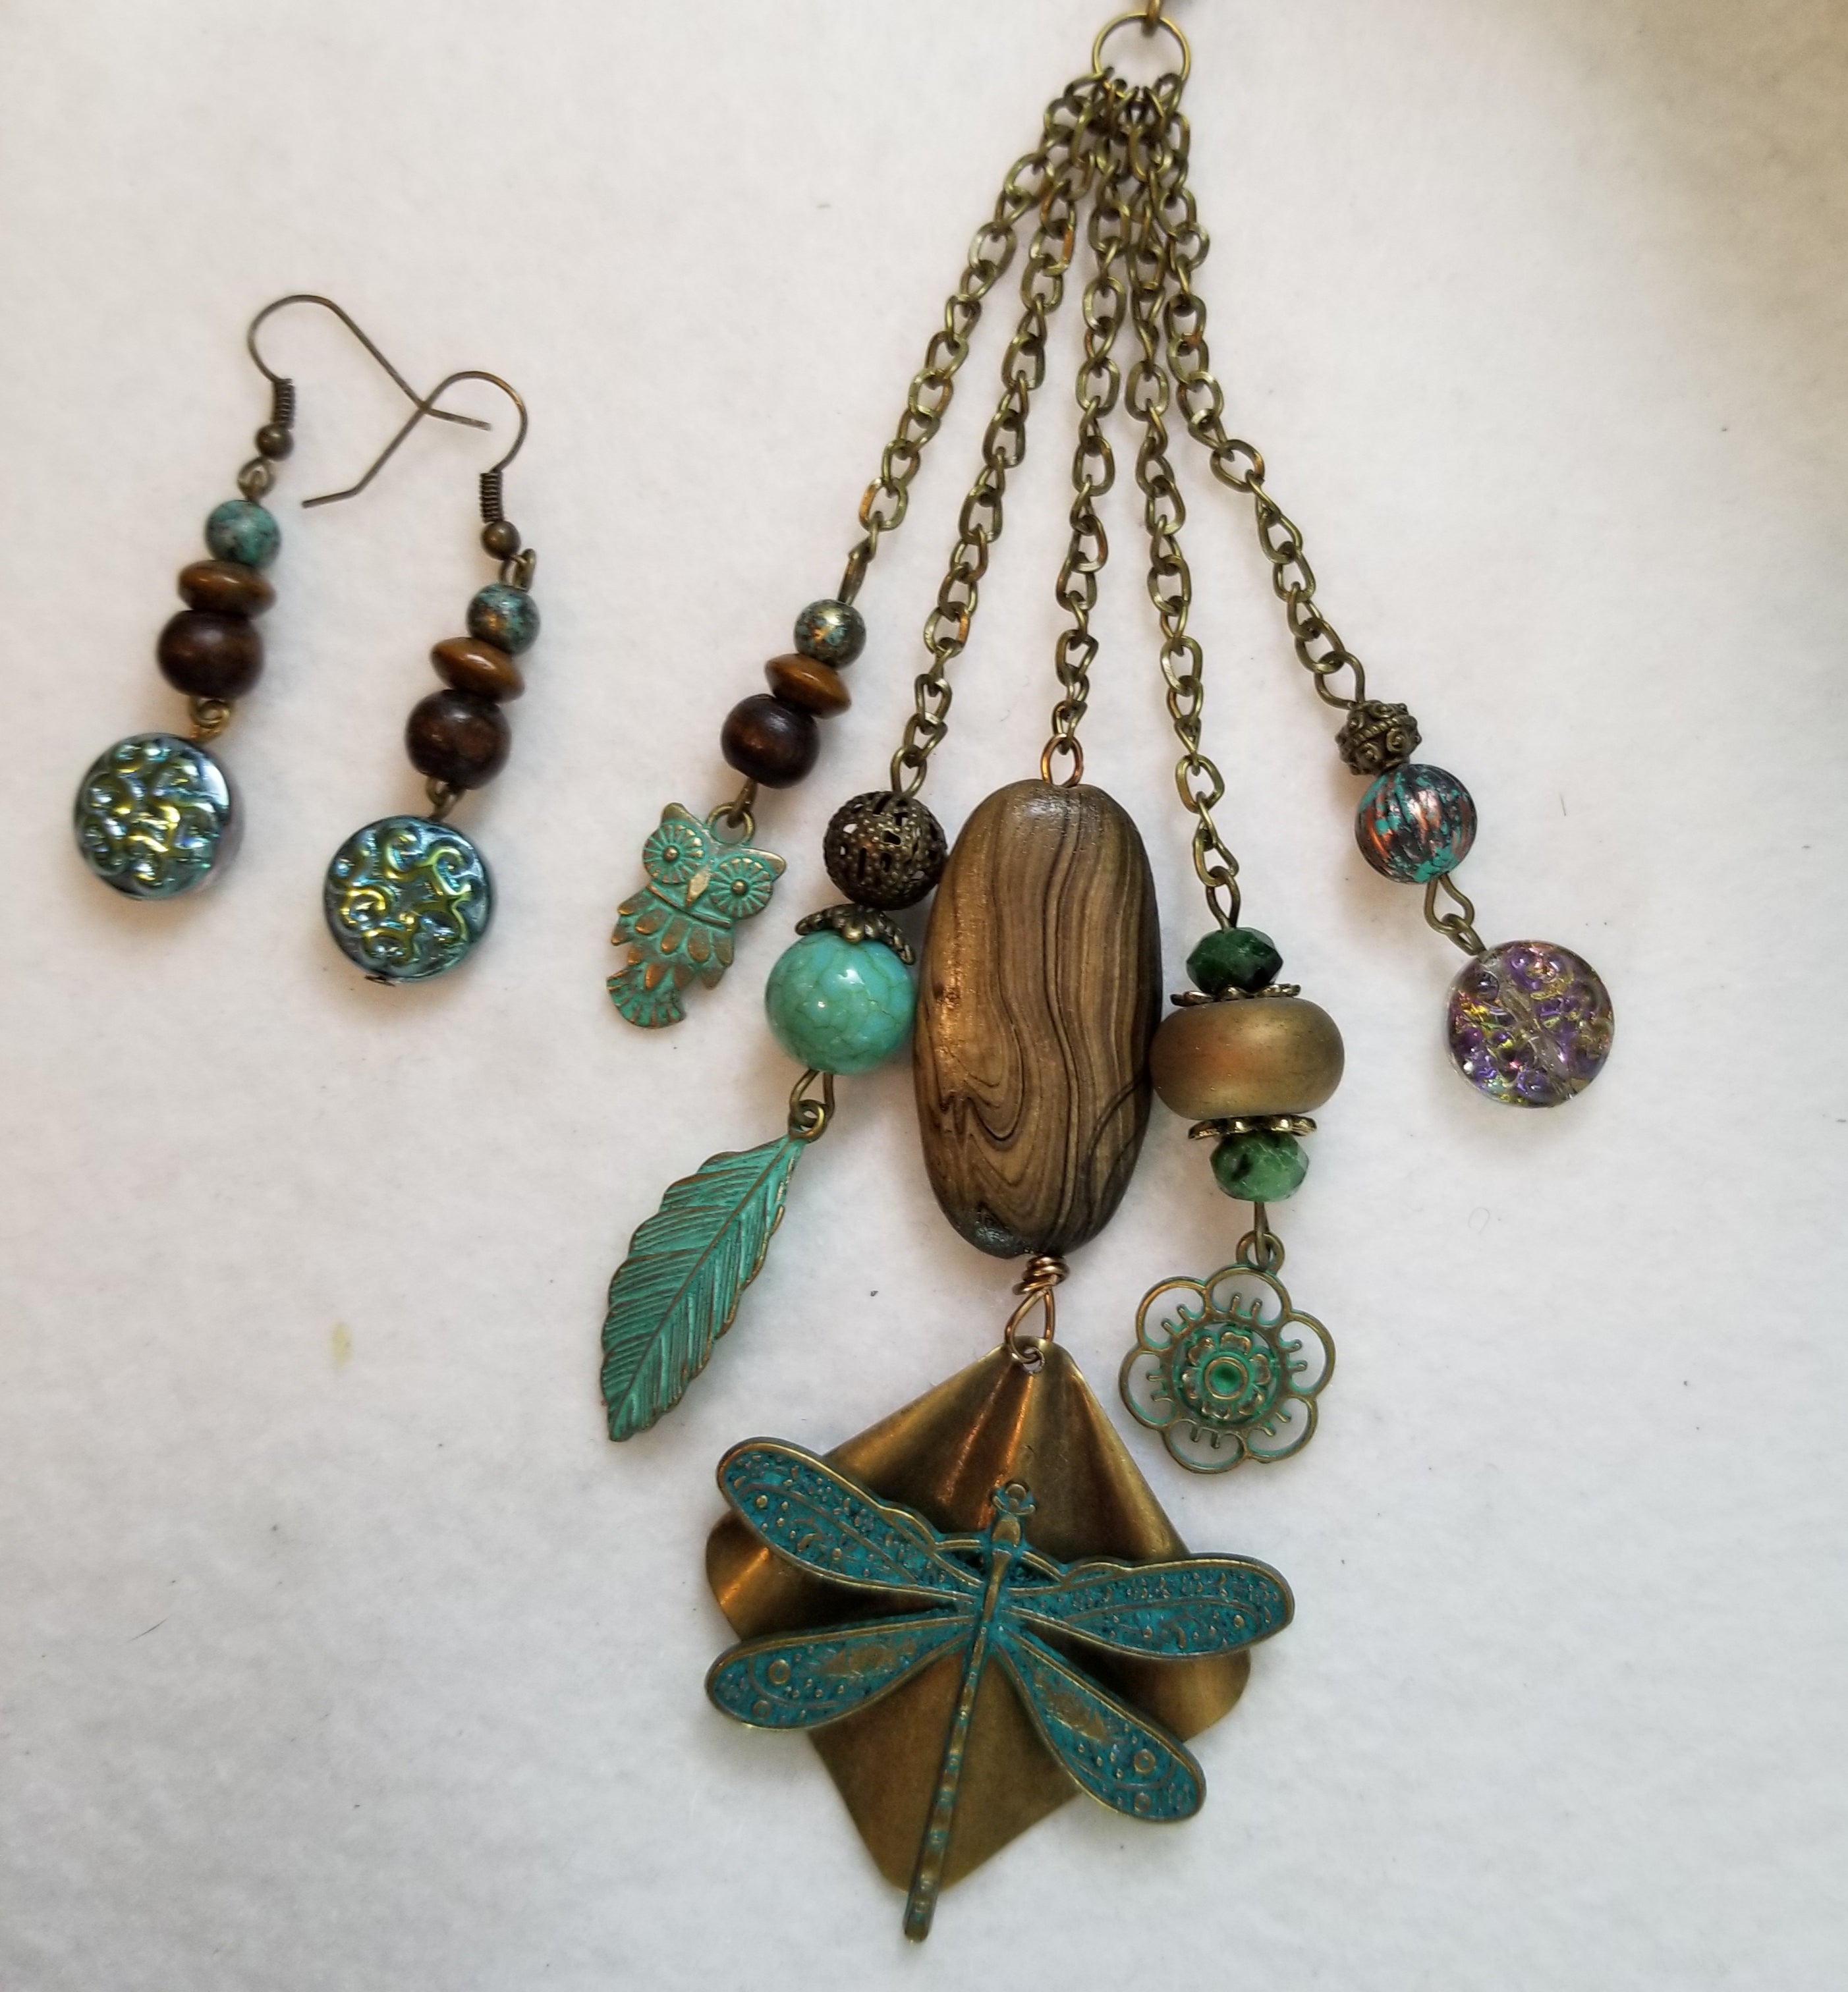 Ancient Dragonfly Necklace with Earrings